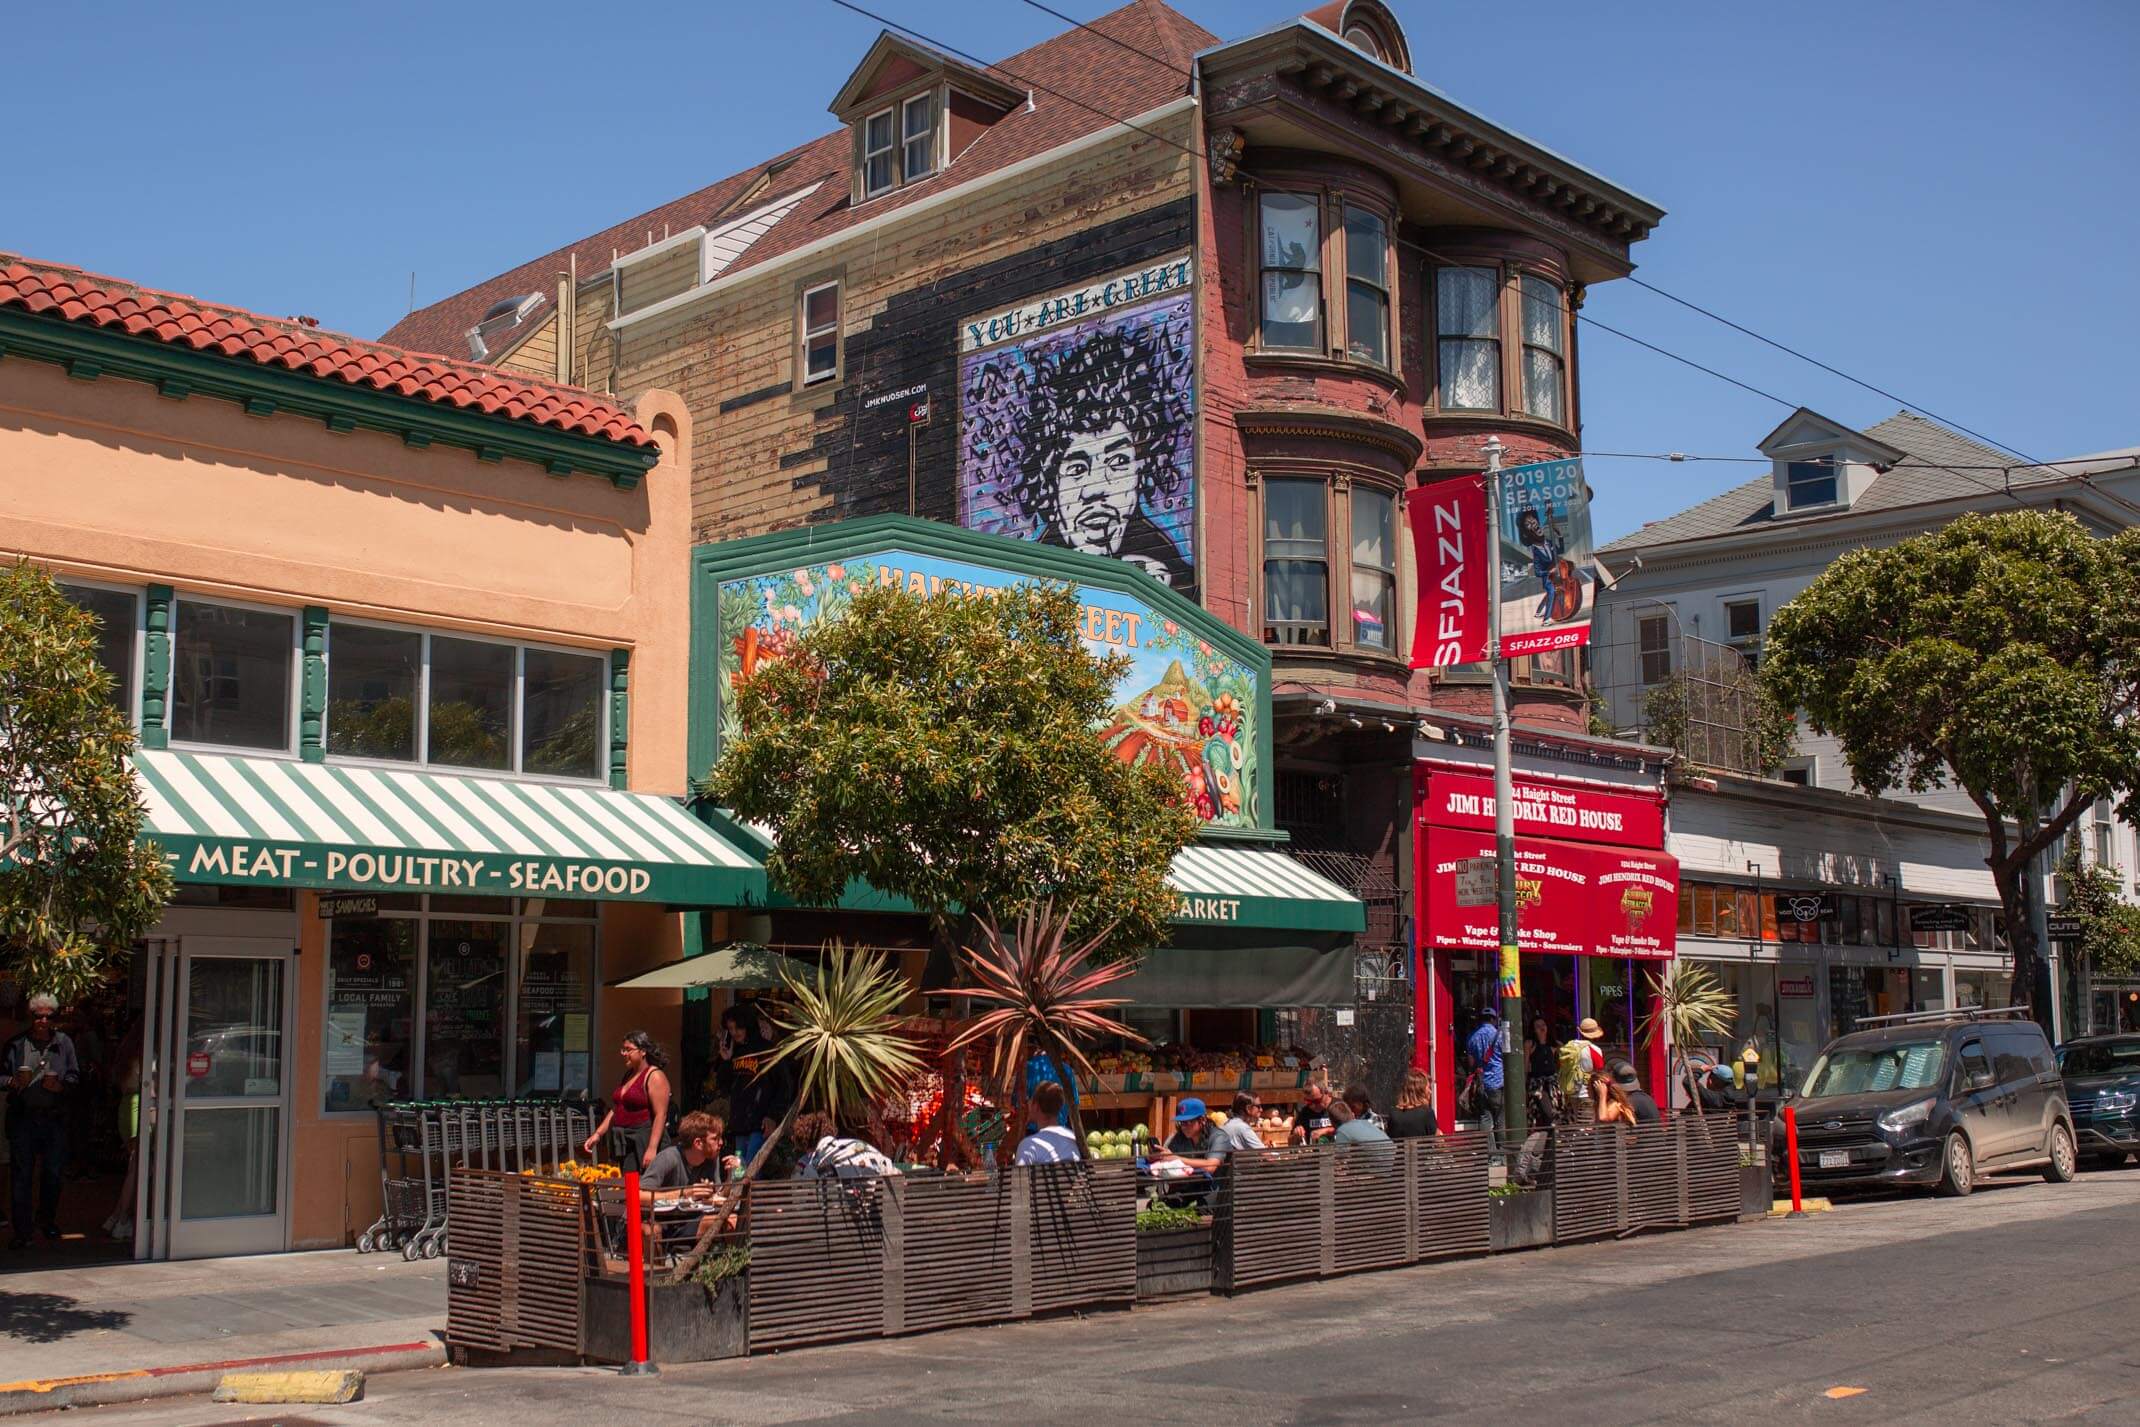 A guide to San Francisco: The best things to do in the city